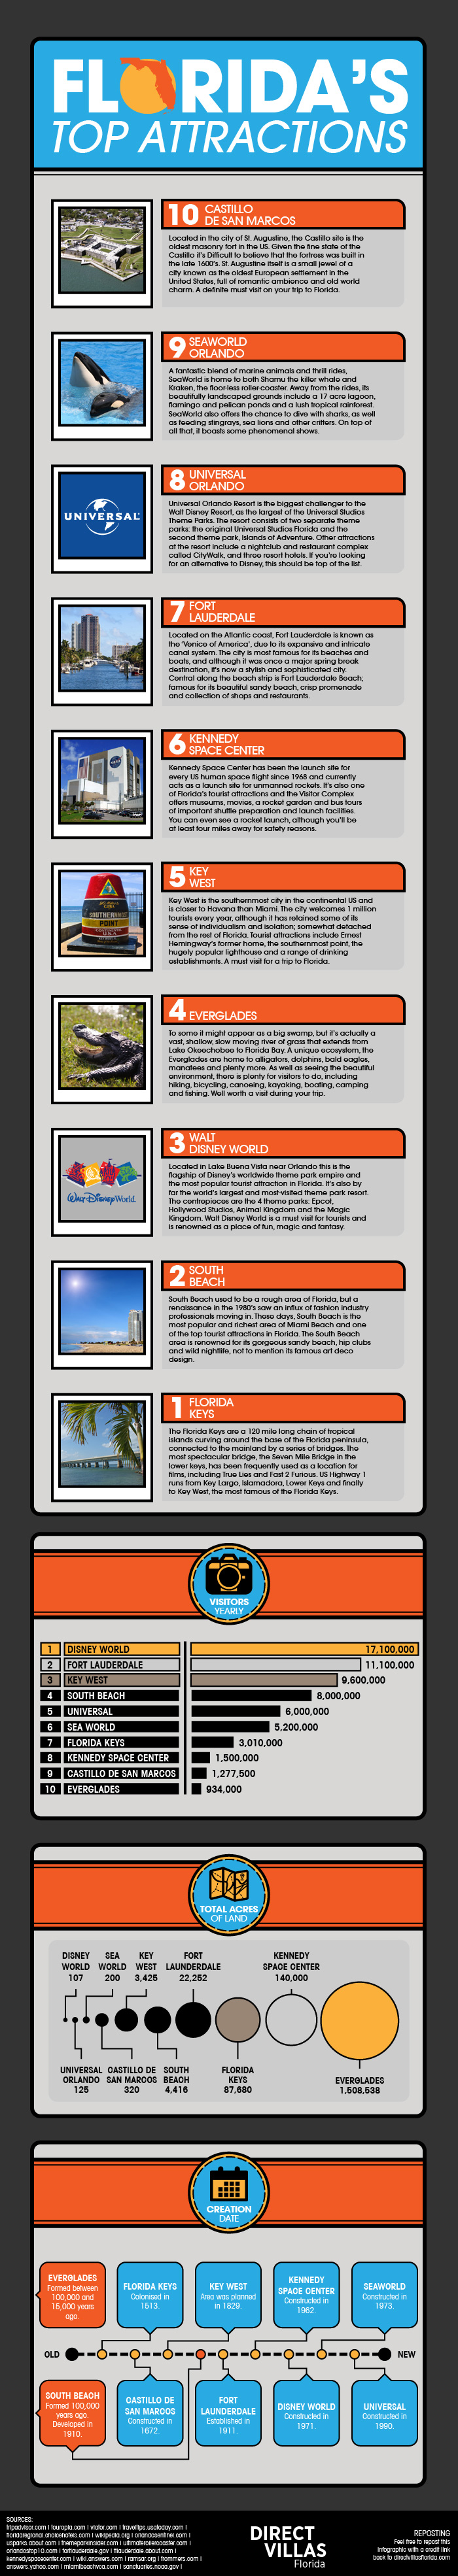 Florida's Top Attractions Infographic